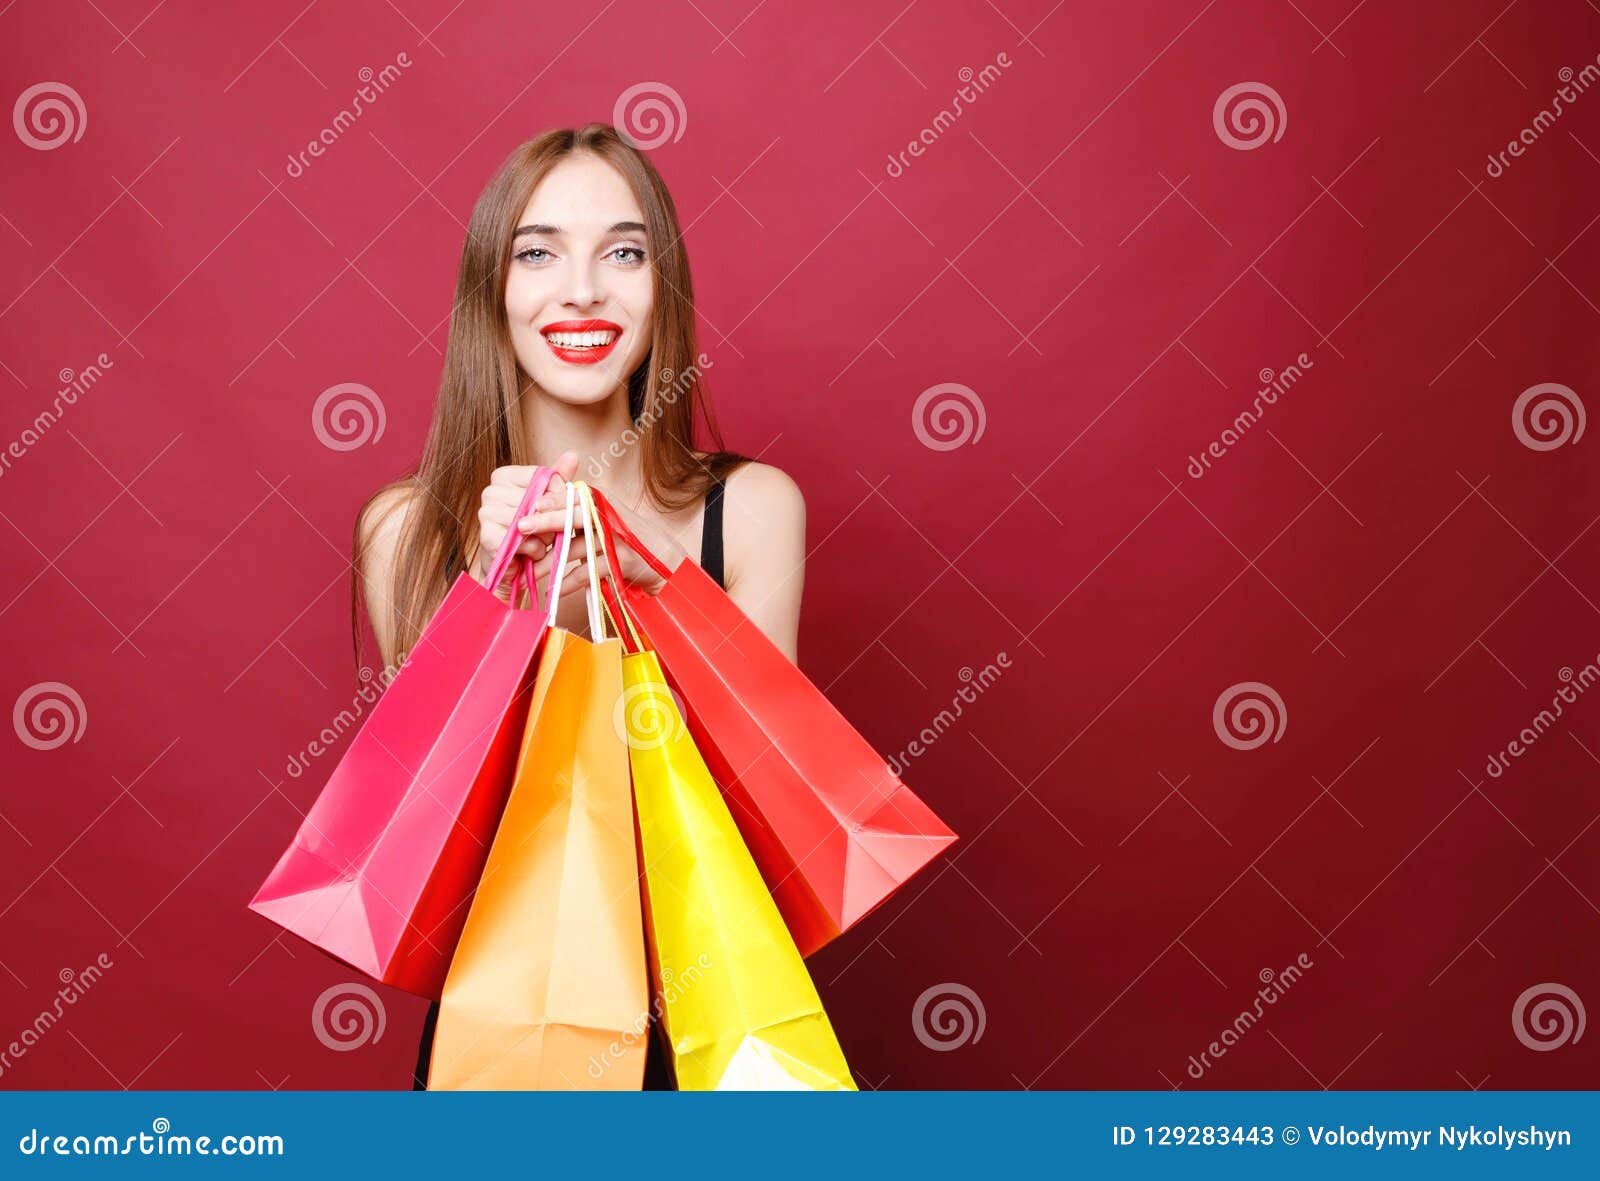 Attractive Woman Holding Many Shopping Bags Stock Image - Image of ...